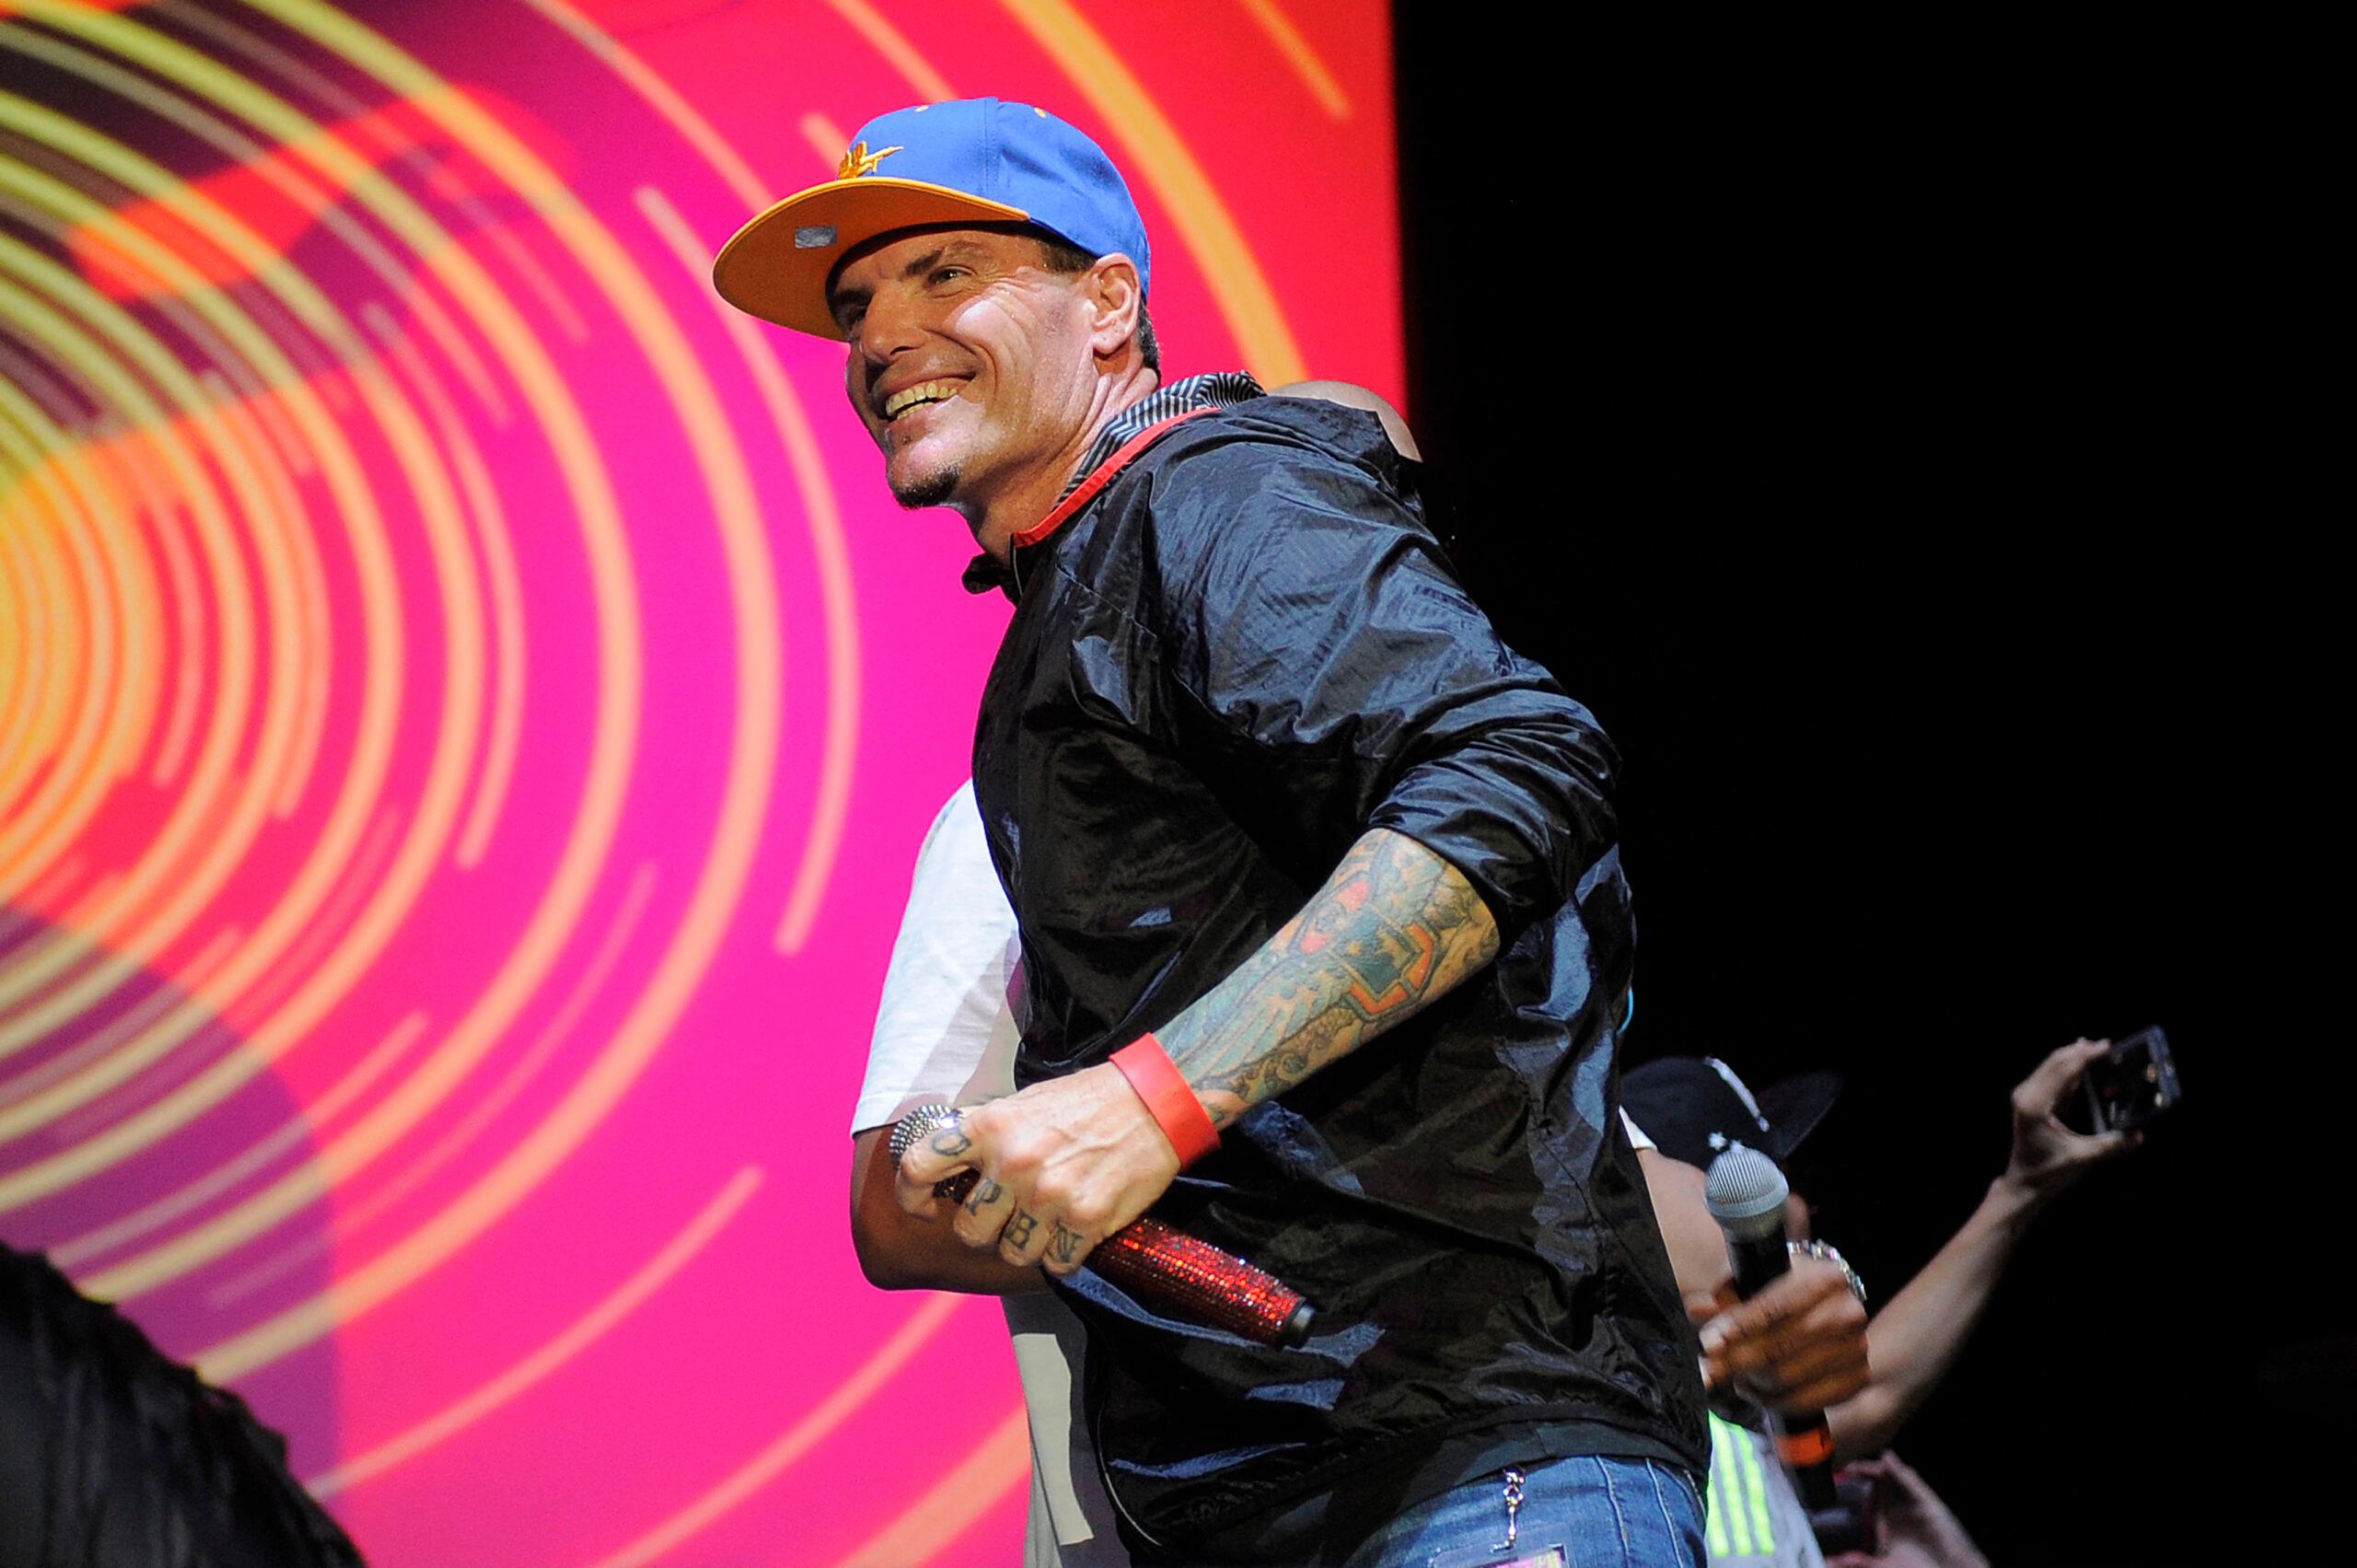 Vanilla Ice performing durinf 'I Love The 90's' at SSE Arena